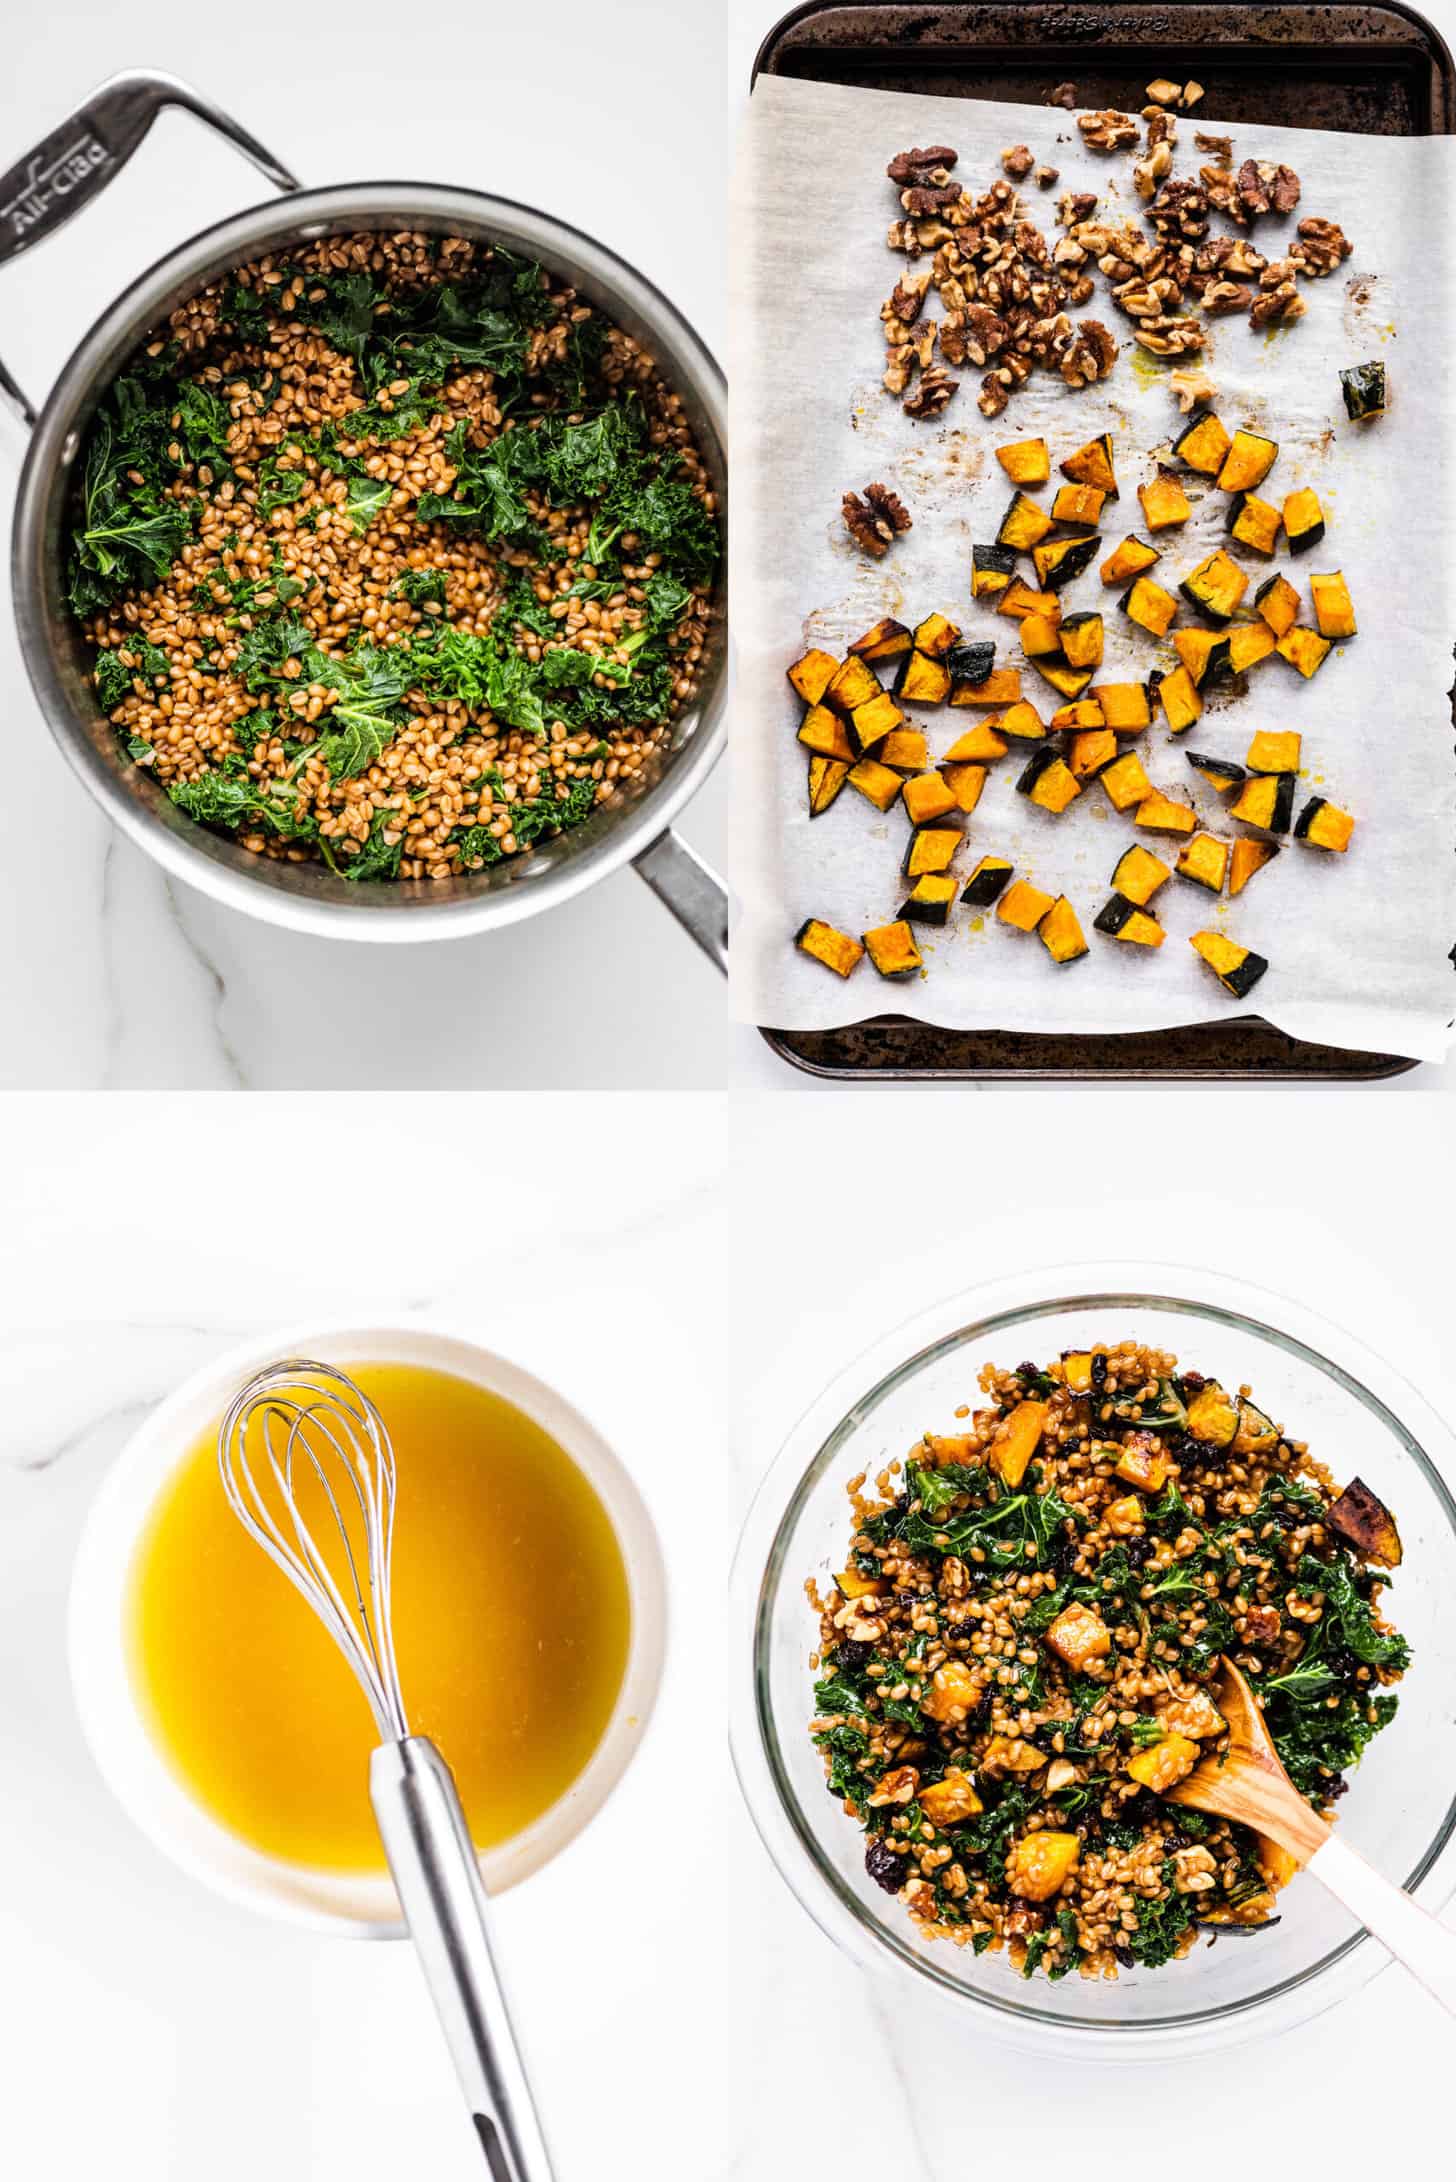 4 pictures showing how to make wheat berry salad. 